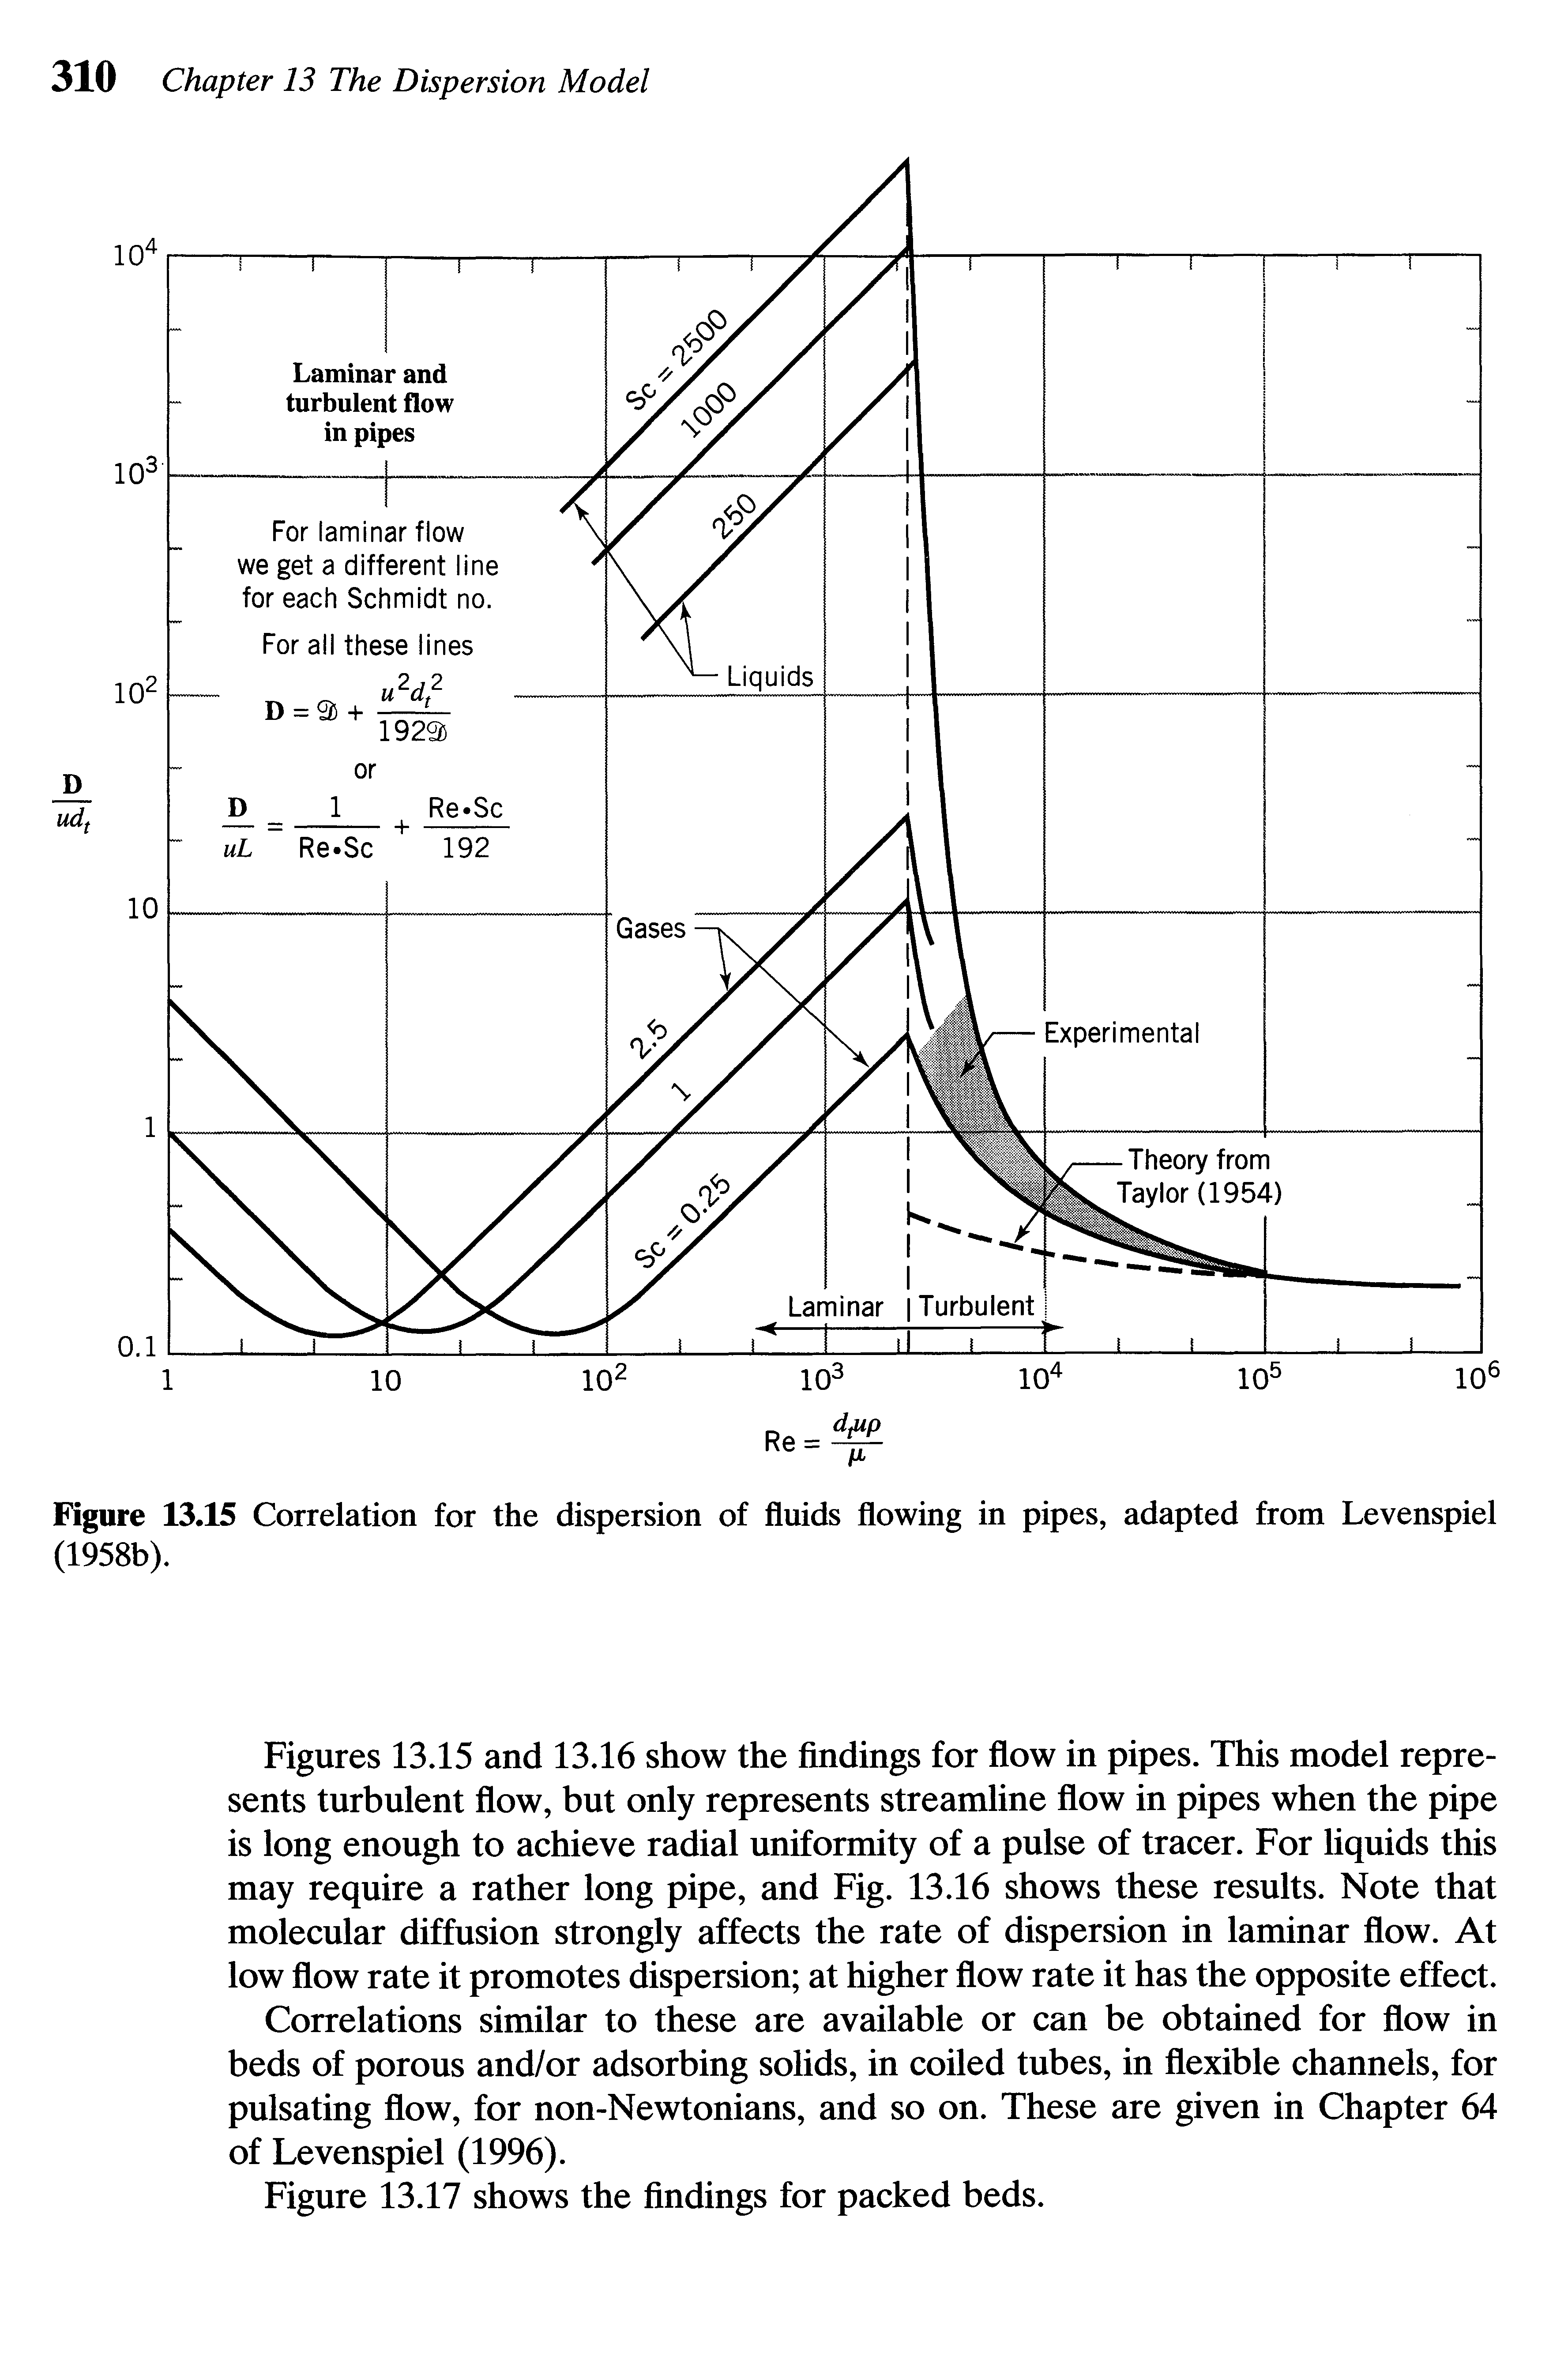 Figures 13.15 and 13.16 show the findings for flow in pipes. This model represents turbulent flow, but only represents streamline flow in pipes when the pipe is long enough to achieve radial uniformity of a pulse of tracer. For liquids this may require a rather long pipe, and Fig. 13.16 shows these results. Note that molecular diffusion strongly affects the rate of dispersion in laminar flow. At low flow rate it promotes dispersion at higher flow rate it has the opposite effect.